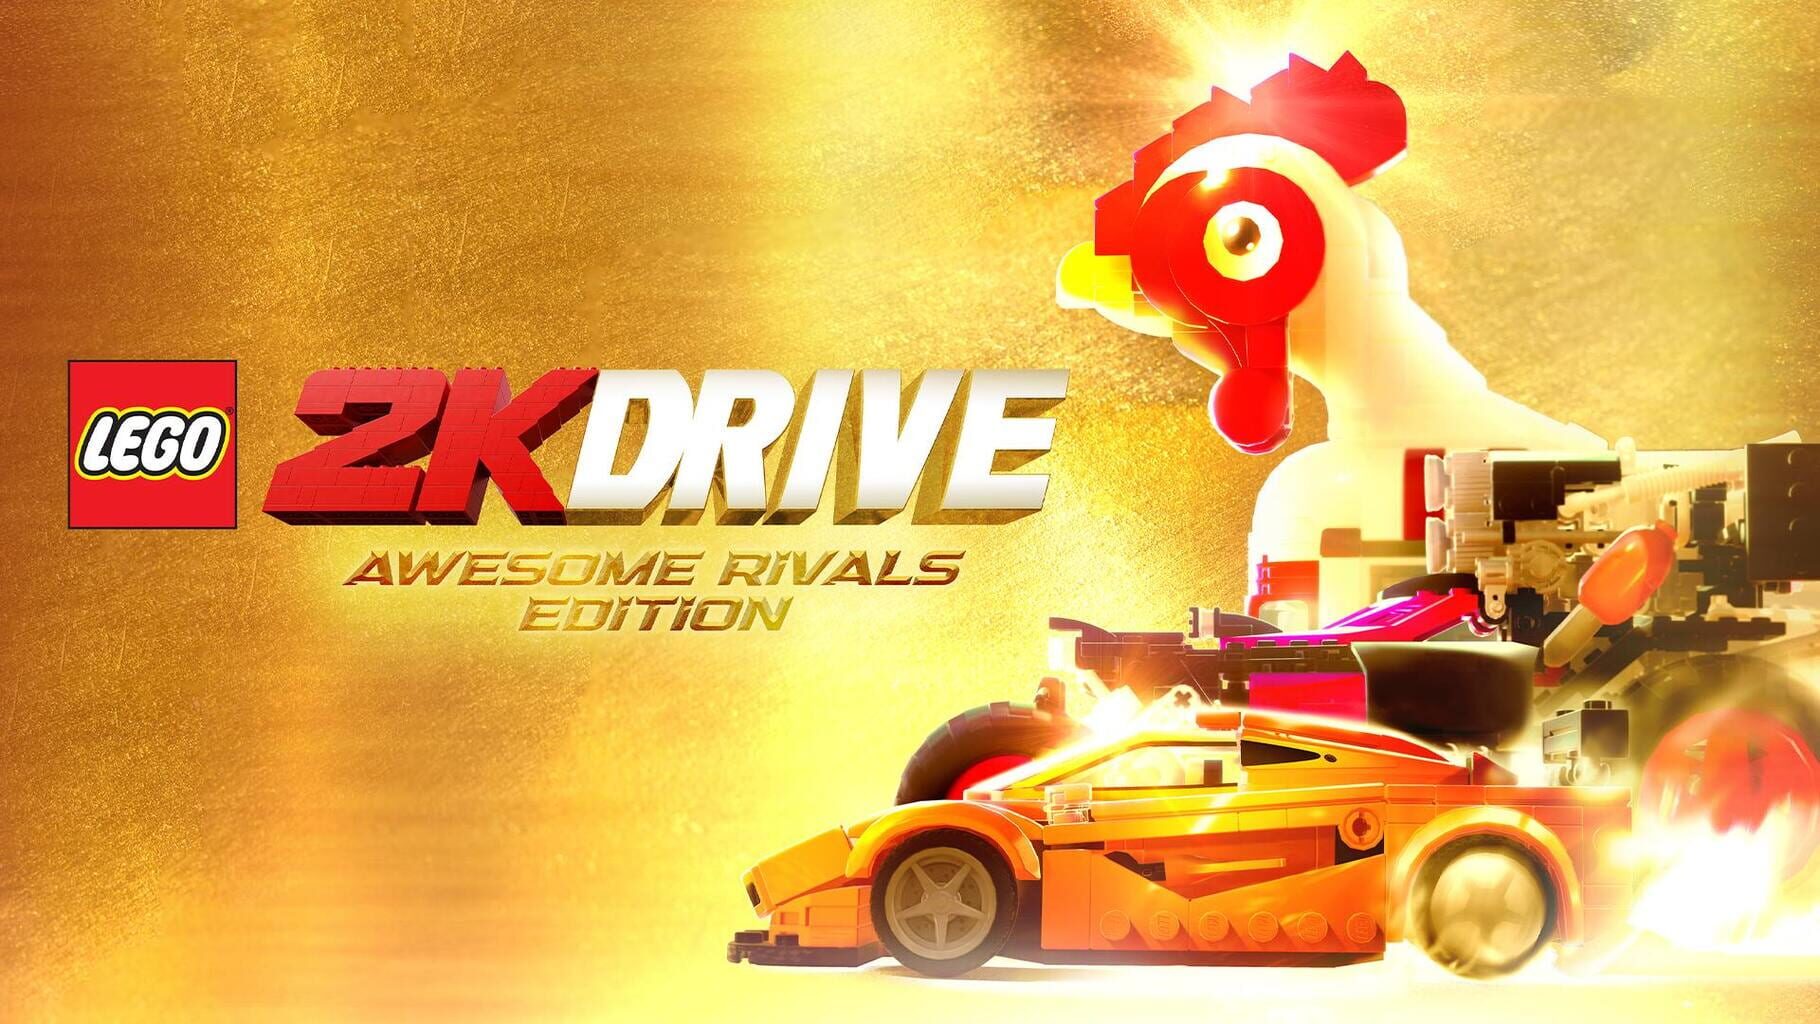 LEGO 2K Drive: Awesome Rivals Edition artwork